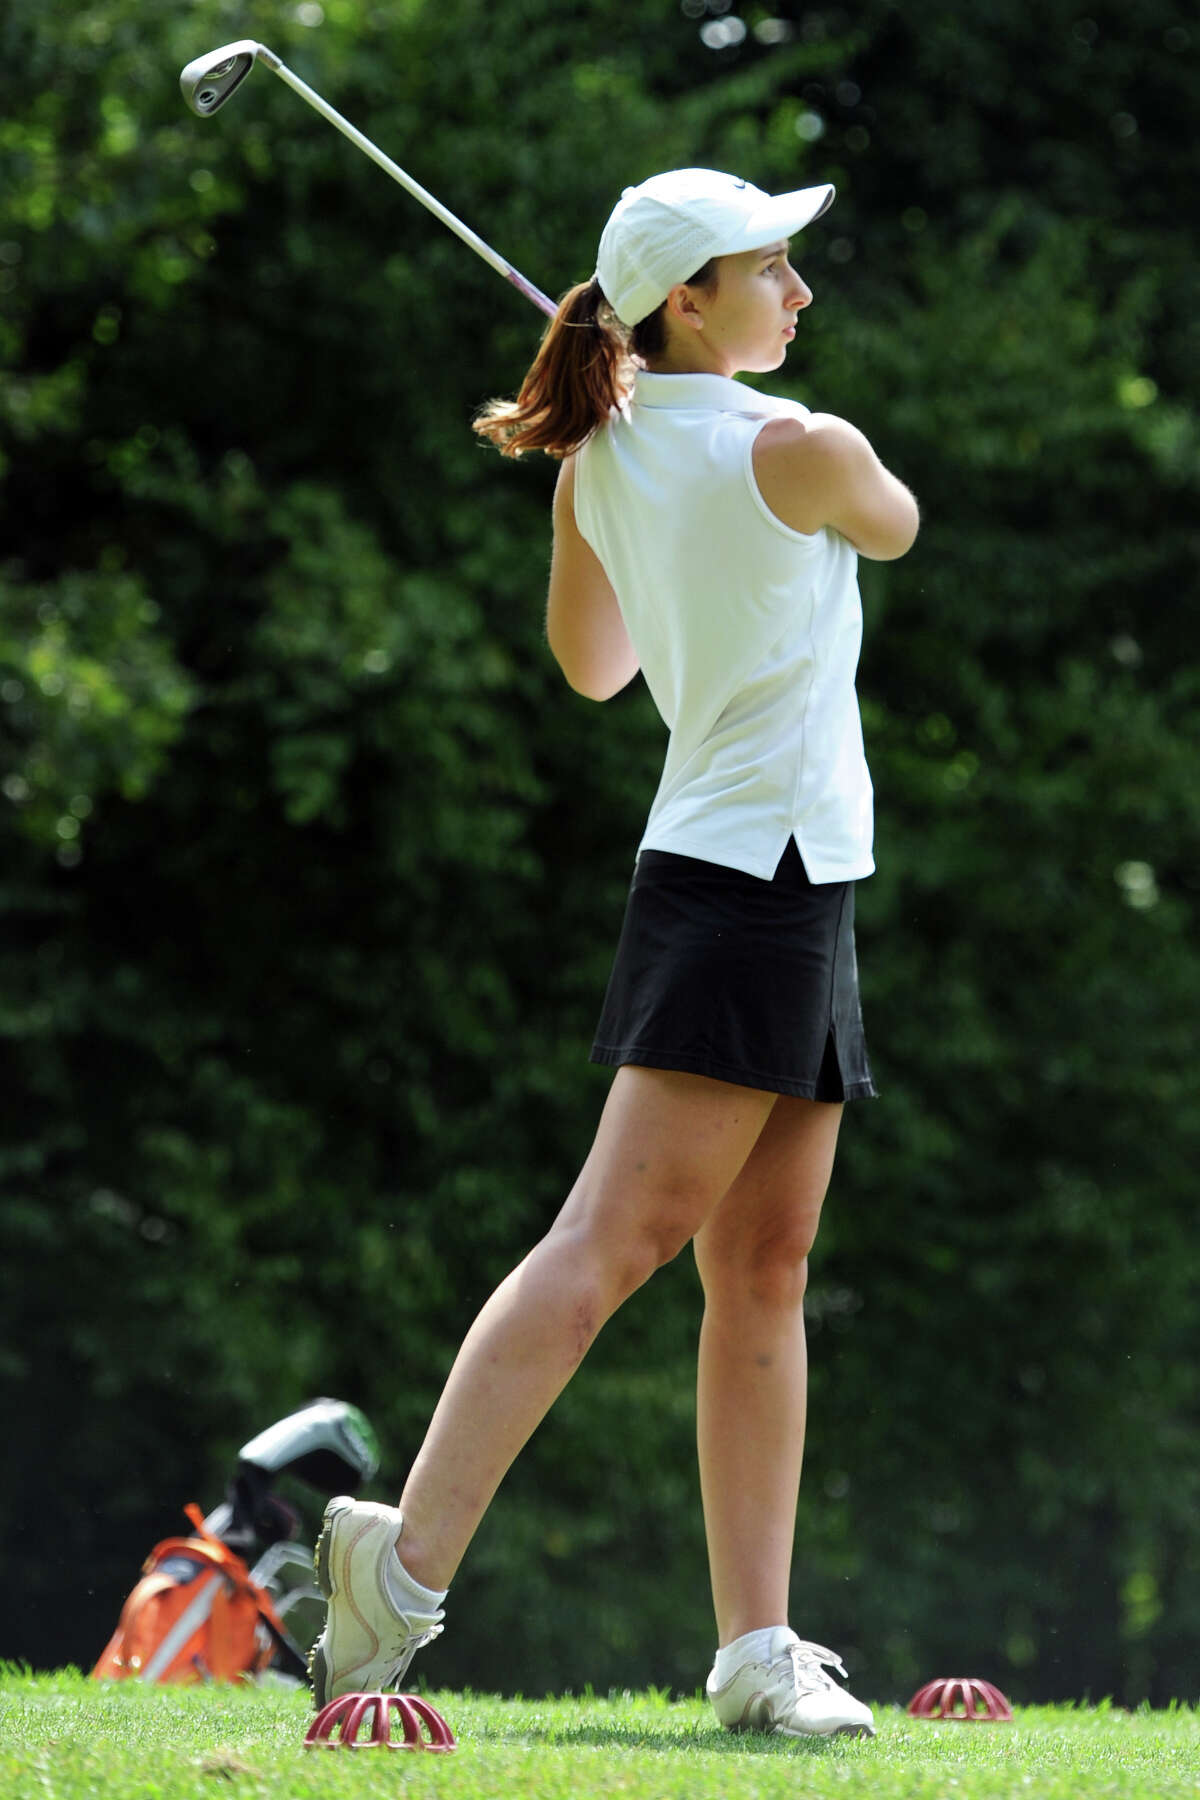 Devyn Howe, of Danbury, watches her drive during the Fran McCarthy Junior Golf Tournament at the Richter Park Golf Course, in Danbury, Conn. Aug. 18, 2014. Howe is scheduled to compete in this year's event, scheduled for Monday.